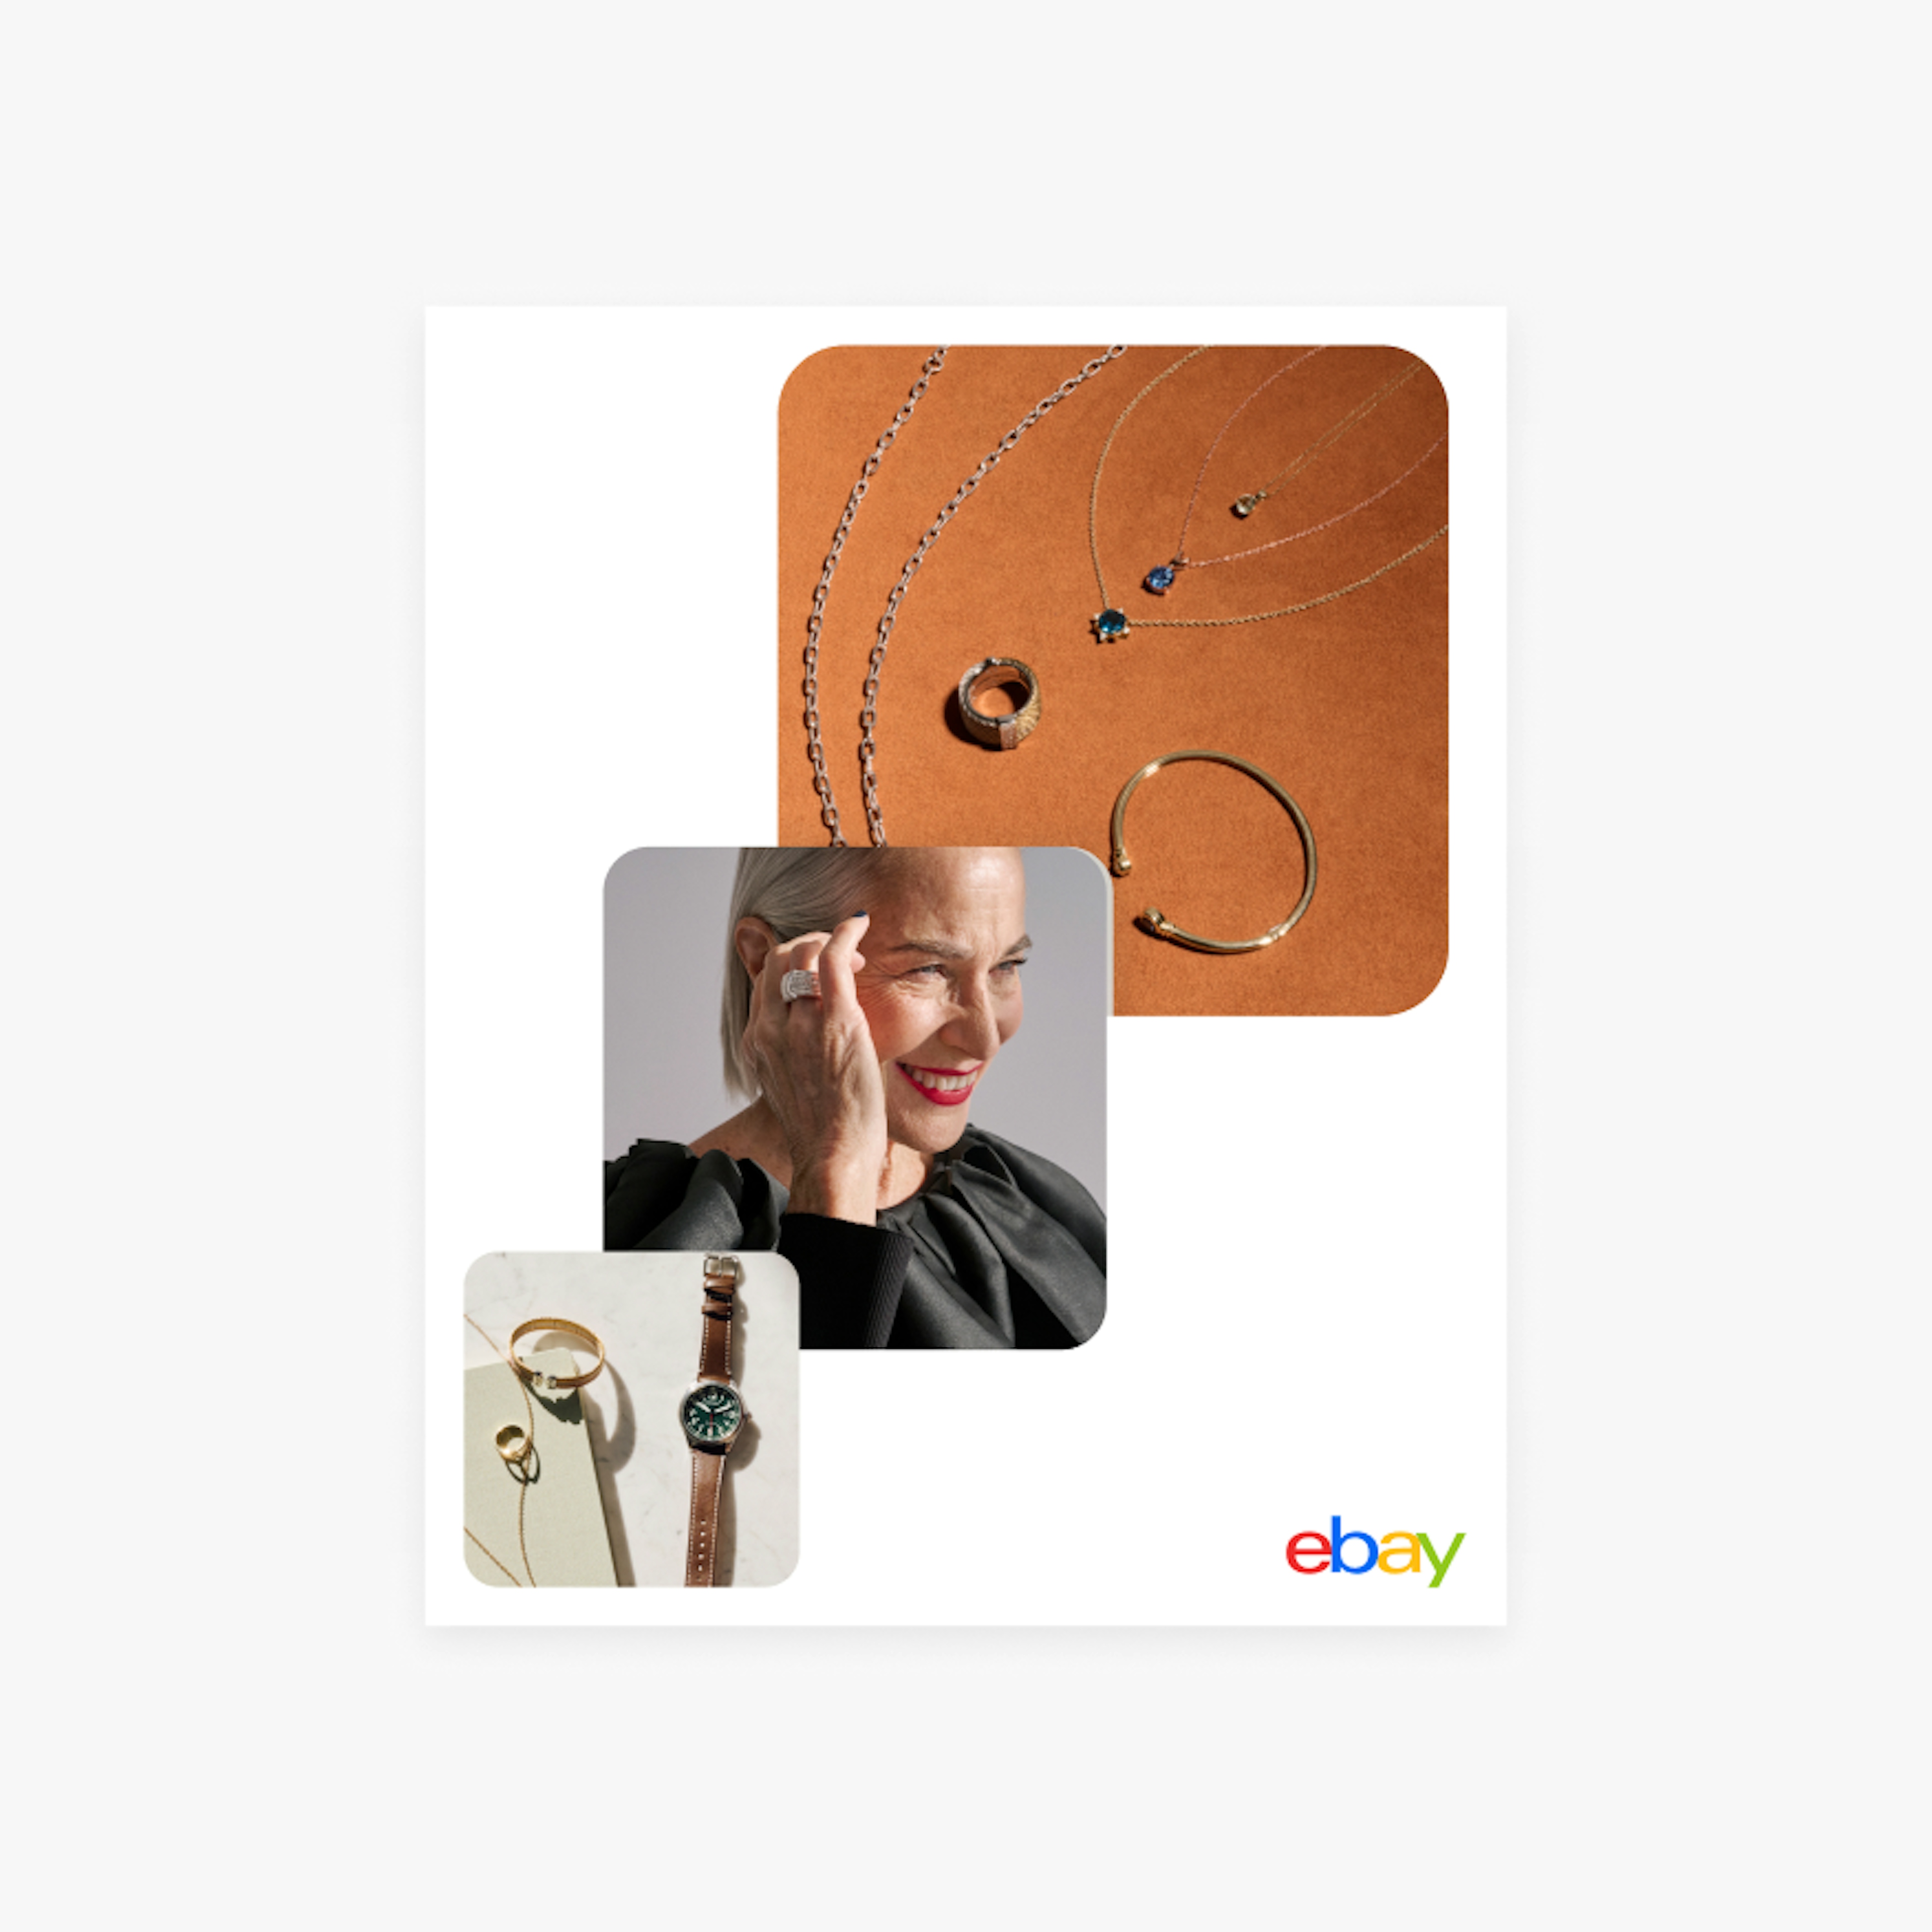 A stacked image layout including 3 images moving diagonally from bottom left to rop right.
The first image is a collage of jewelry and accessories. The second image is a smiling older woman with gray hair wearing a black top and jewelry. The third image is a brown background with a variety of jewelry placed on top. The eBay logo is in the bottom right corner of the layout.